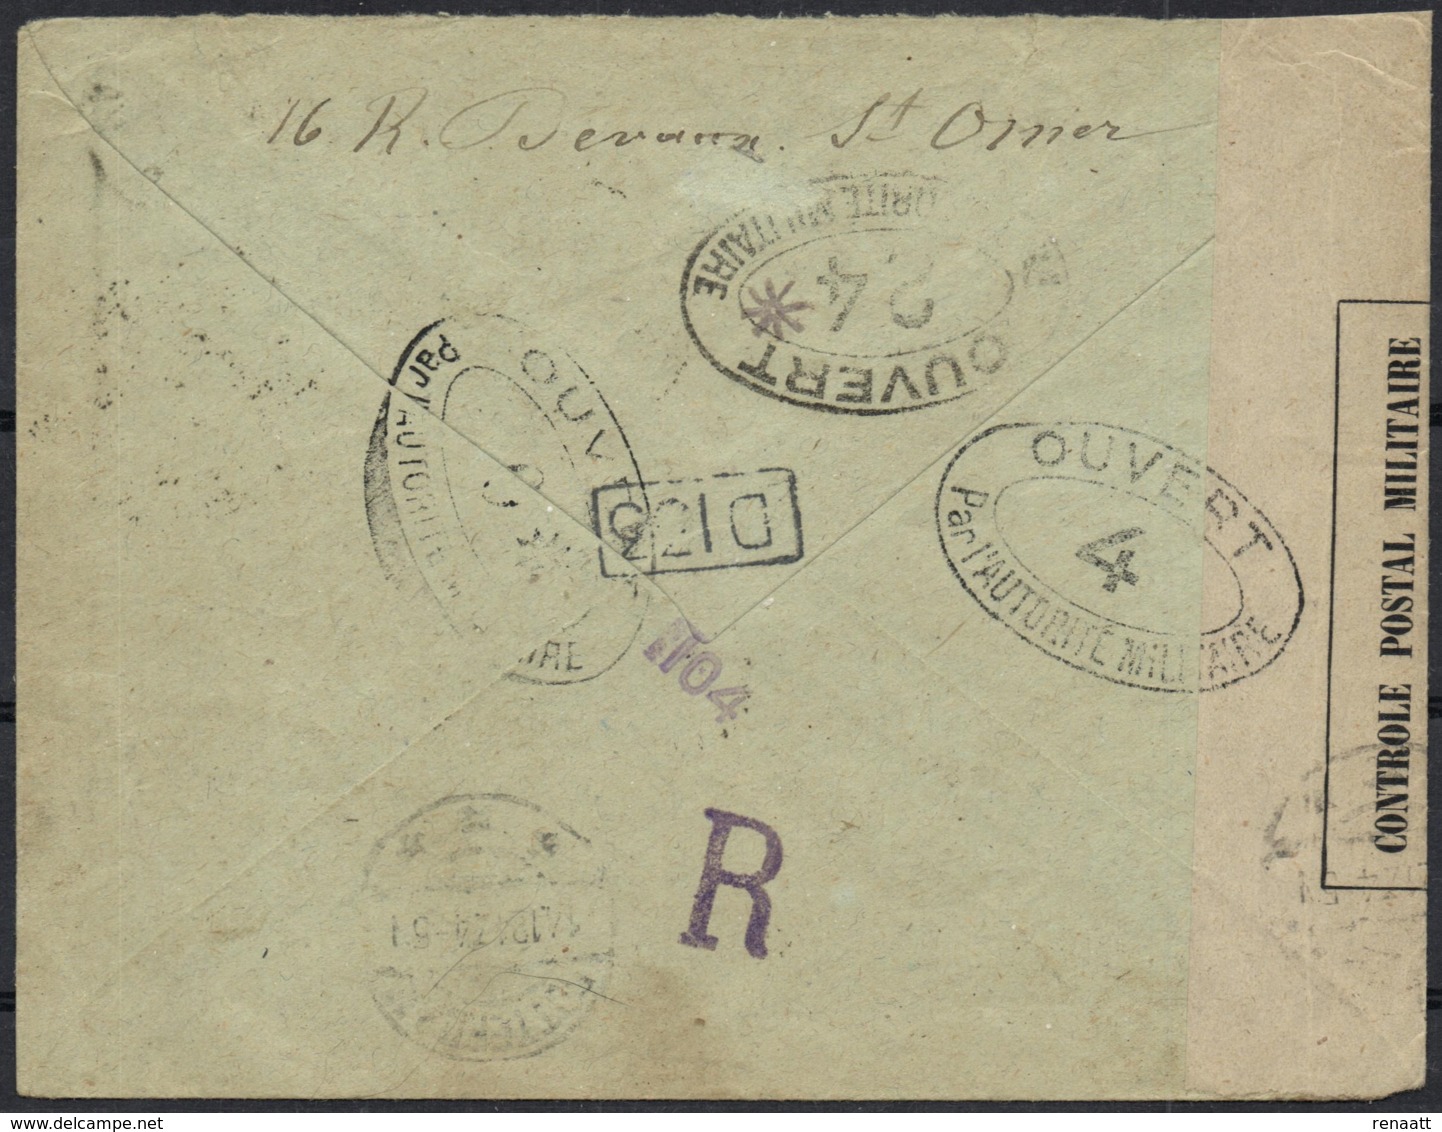 France 1917 Cover St Omer 18-Nov-1917 To Rotterdam Netherlands 14-Dec-1917 Censor France 0, 4 And 24 Dieppe WWI - Prima Guerra Mondiale